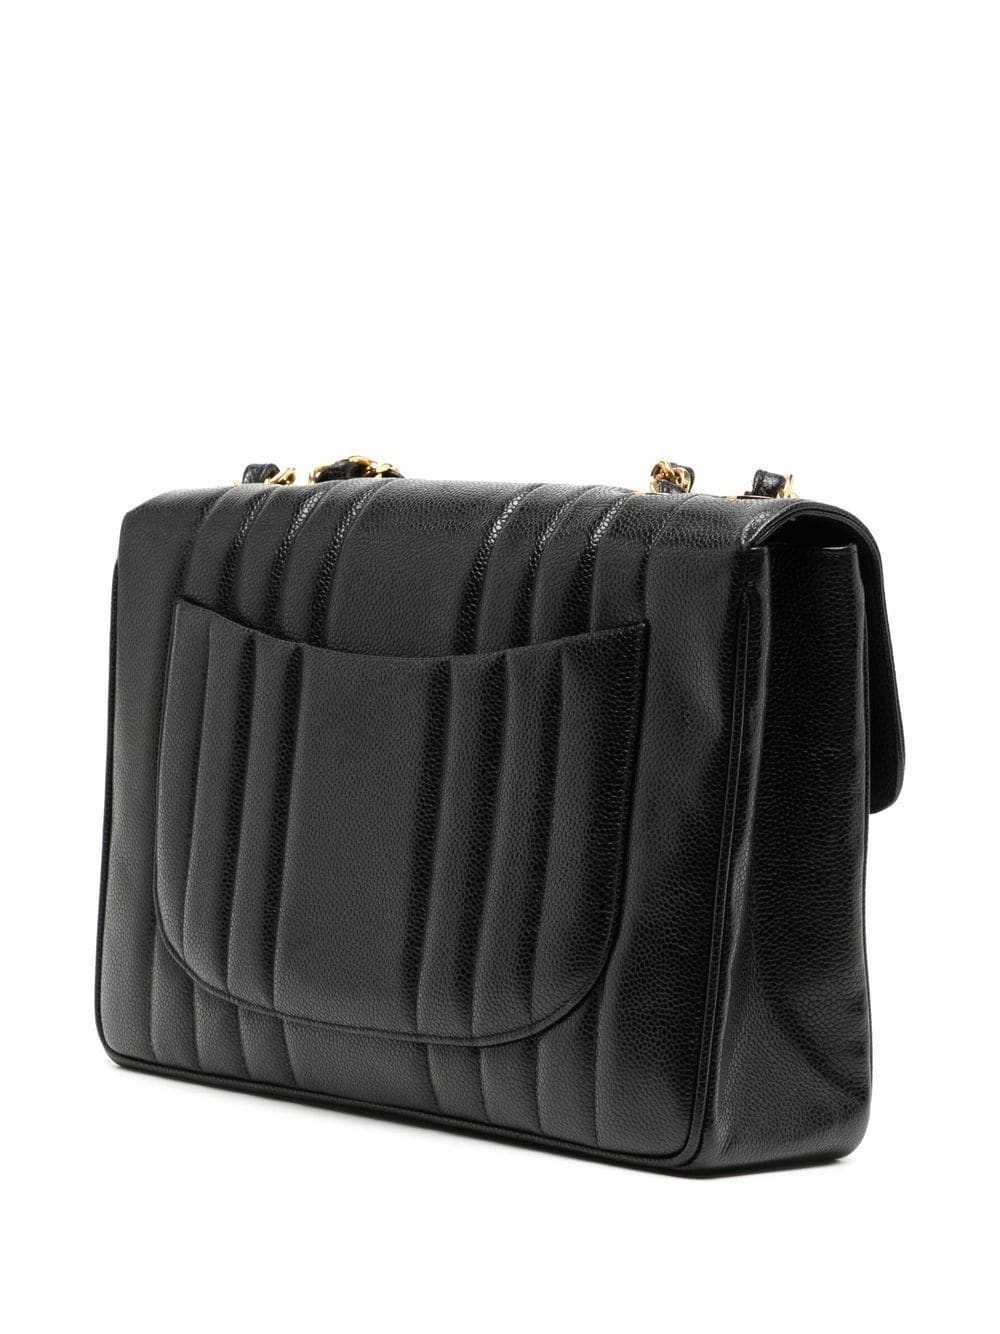 CHANEL Pre-Owned 1992 Mademoiselle Classic Flap s… - image 3